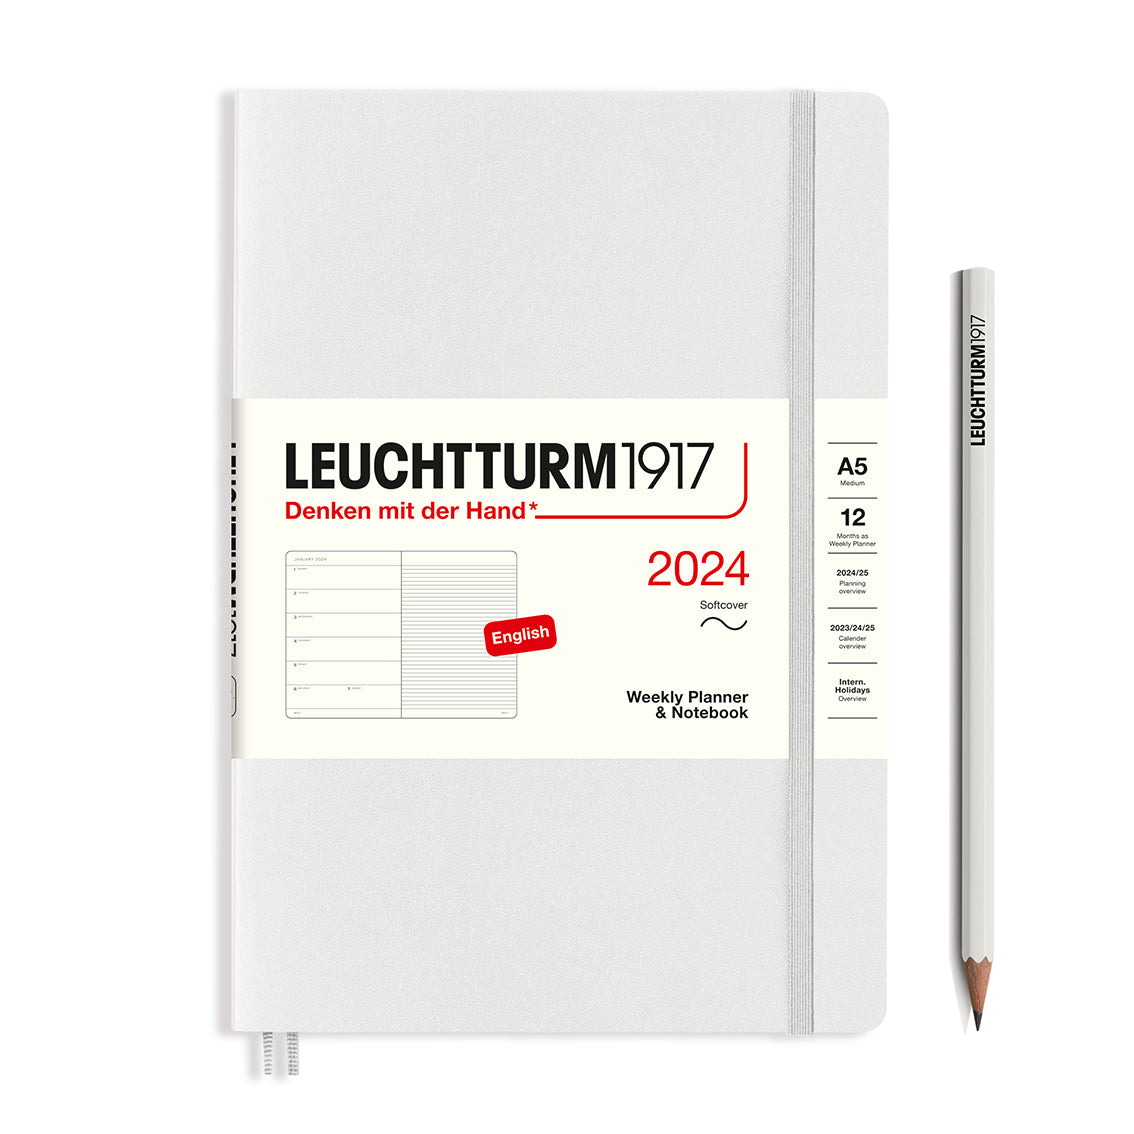 An image of a light grey planner with a light grey elastic band holding it together and a cream paper wrap around the middle stating the business name Leuchtturm1917, that it is for the year 2024, it is a weekly planner and notebook, is A5 in size and an English language version. It has an image on the wrap showing the inside layout which is a week on the left hand page and a notes page on thr right hand page. A light grey pencil is shown at the side of the planner.